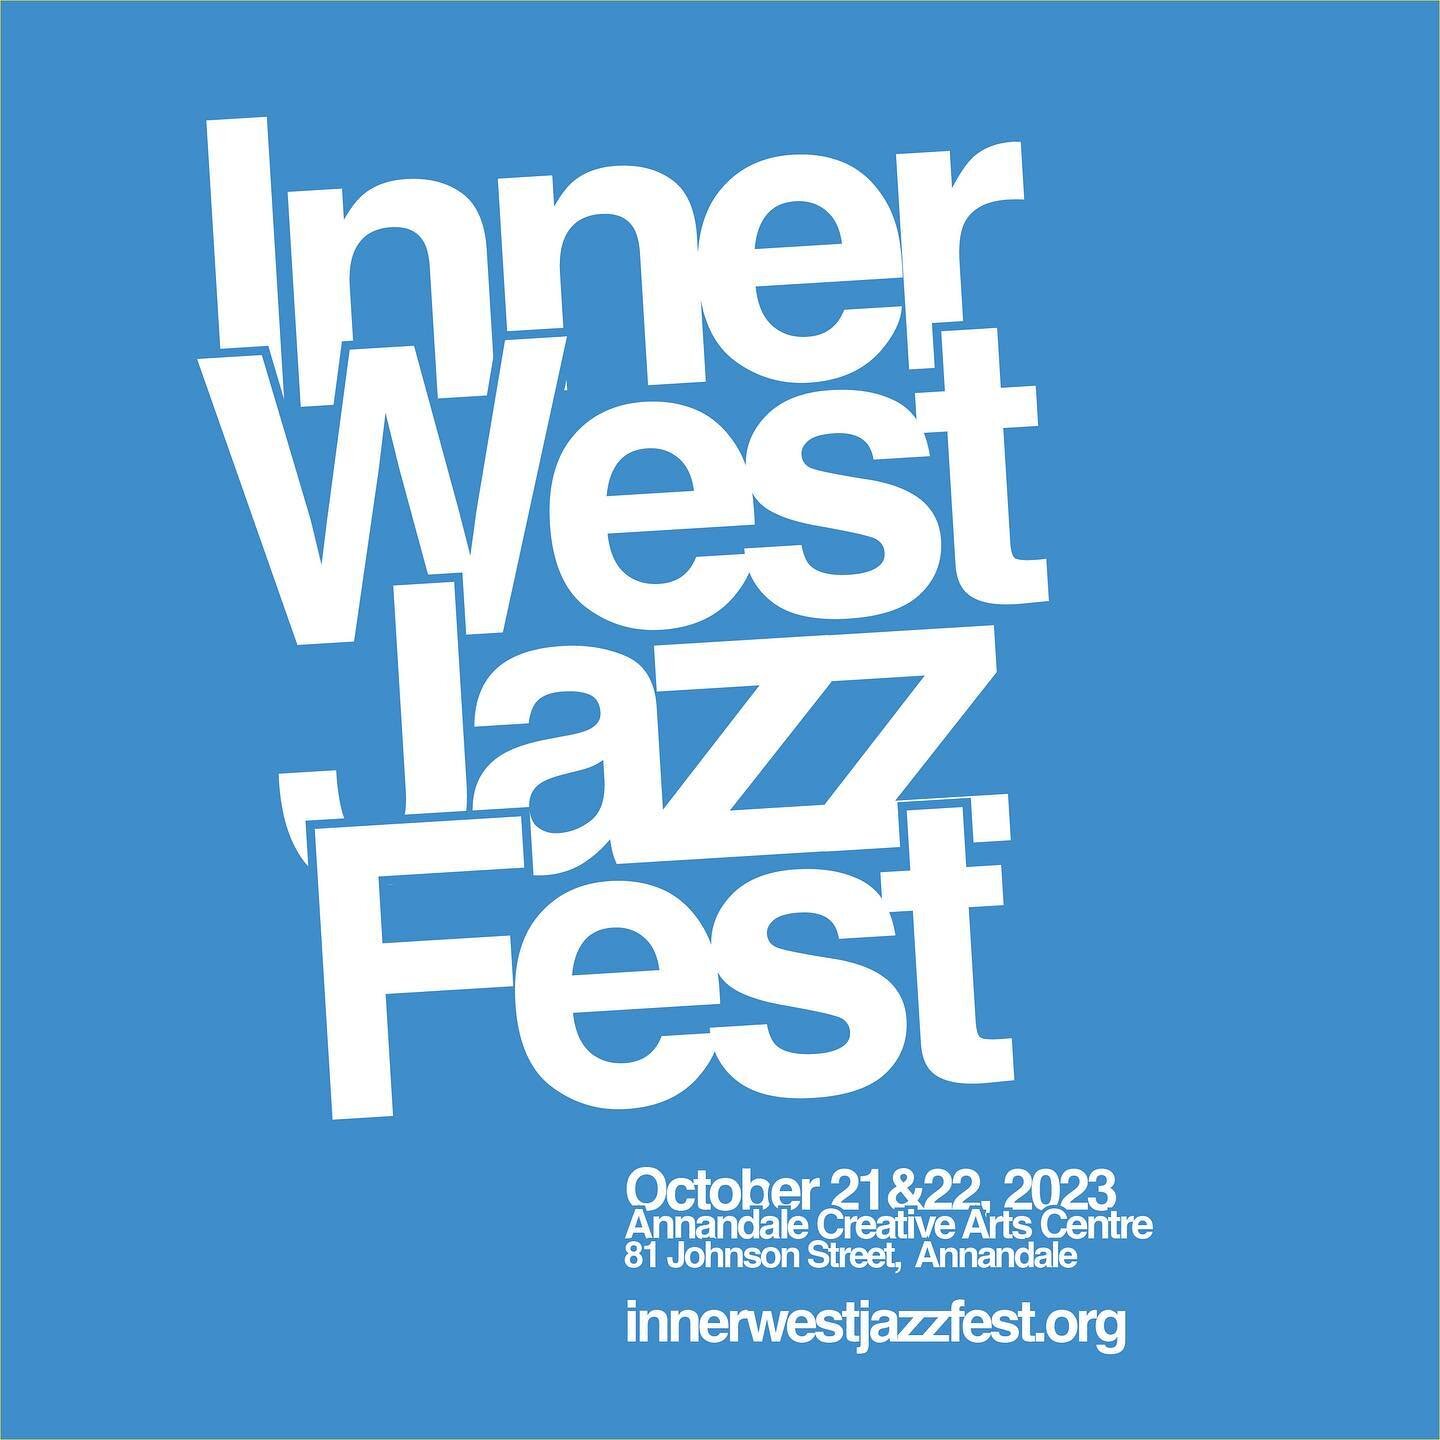 Of course, this huge festival is happening over the weekend. Saturday 21st and Sunday 22nd. Tix at innerwestjazzfest.org

@alisterspence @alxandraspence @claytontthomas @laurenzpike @gentle_novak @hilary.geddes @j.shhhh @mikenockmusic @benlerns @samg